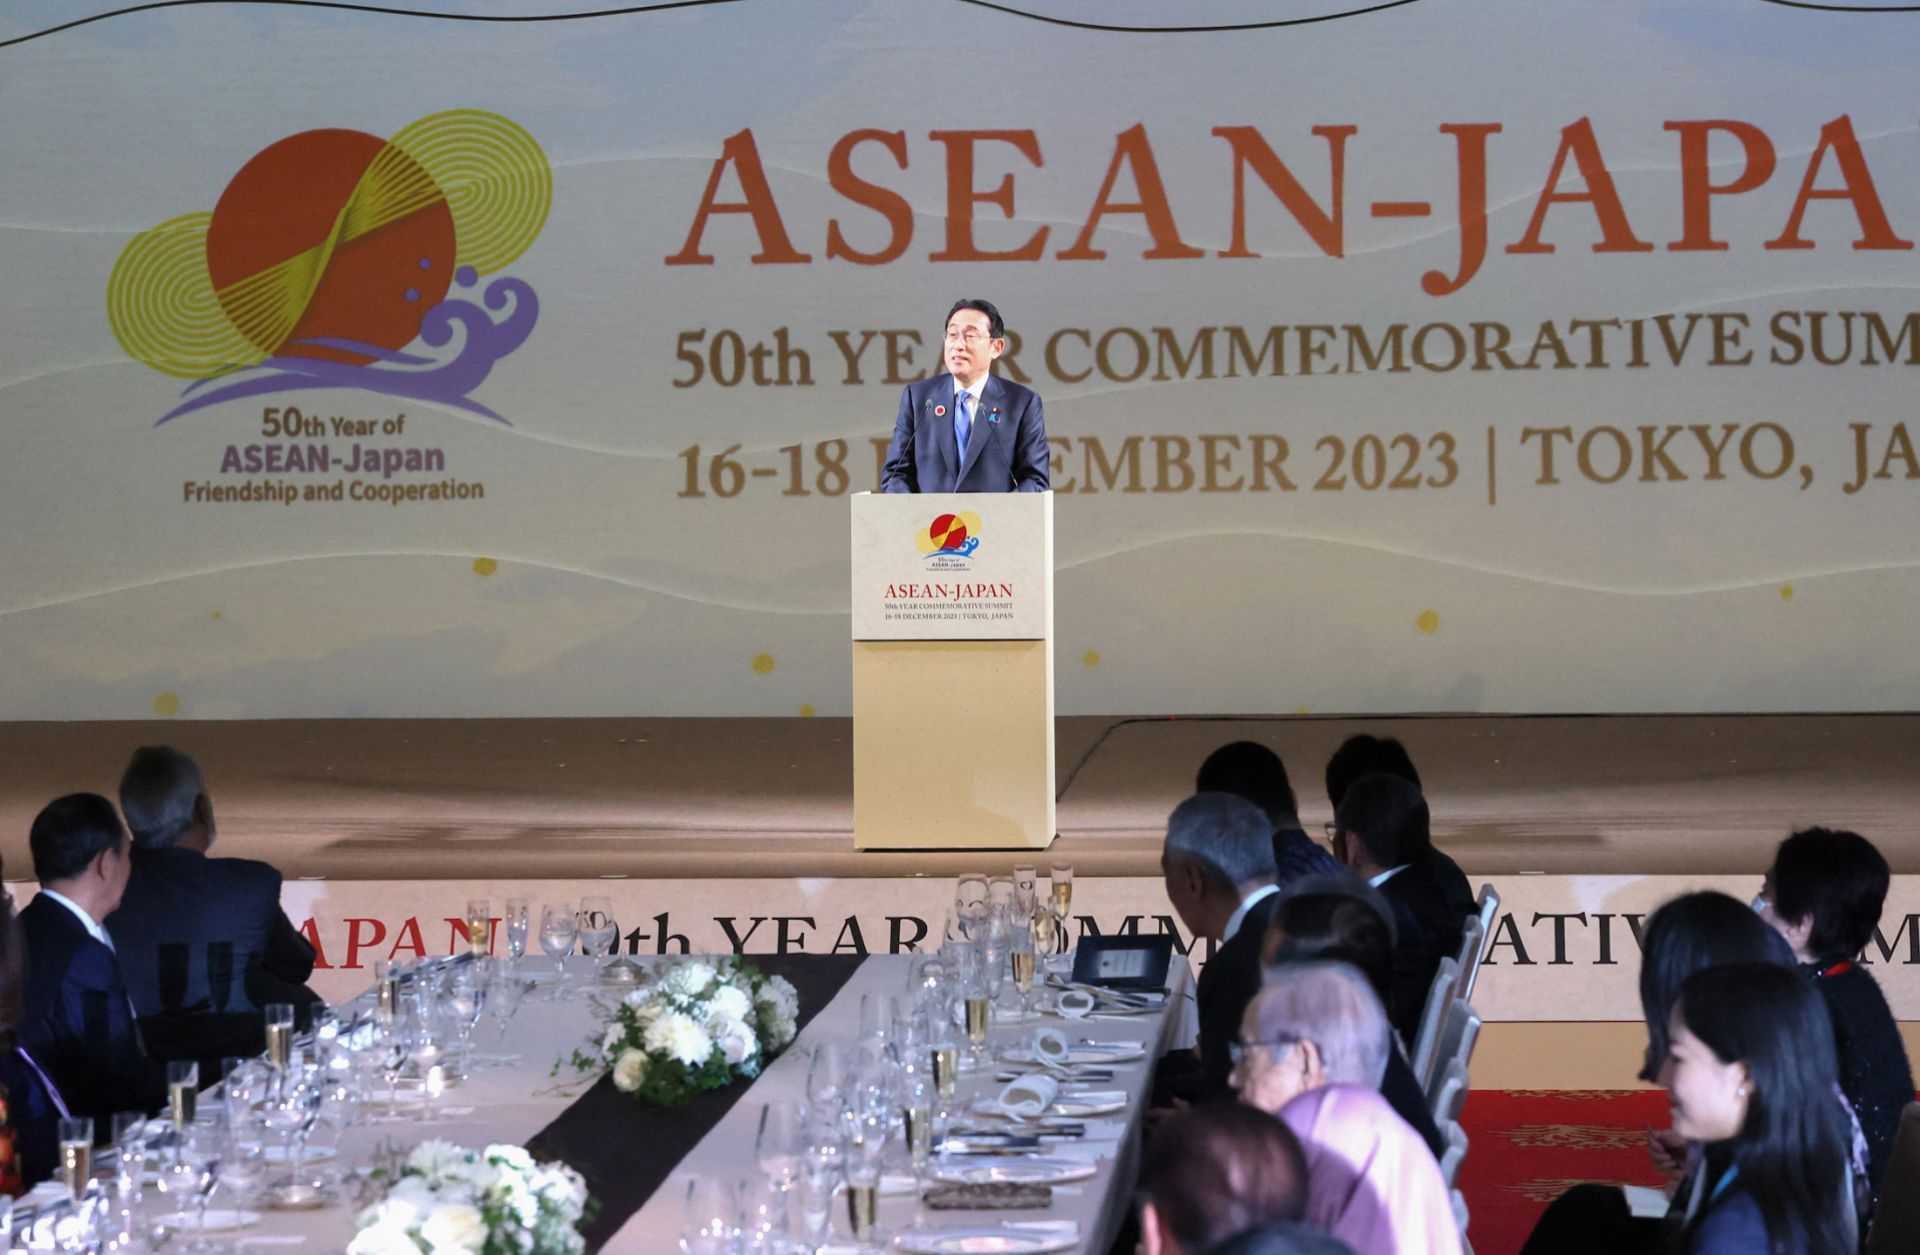 Japanese Prime Minister Fumio Kishida delivers a speech at the gala dinner for the ASEAN-Japan commemorative summit in Tokyo on Dec. 17, 2023. 